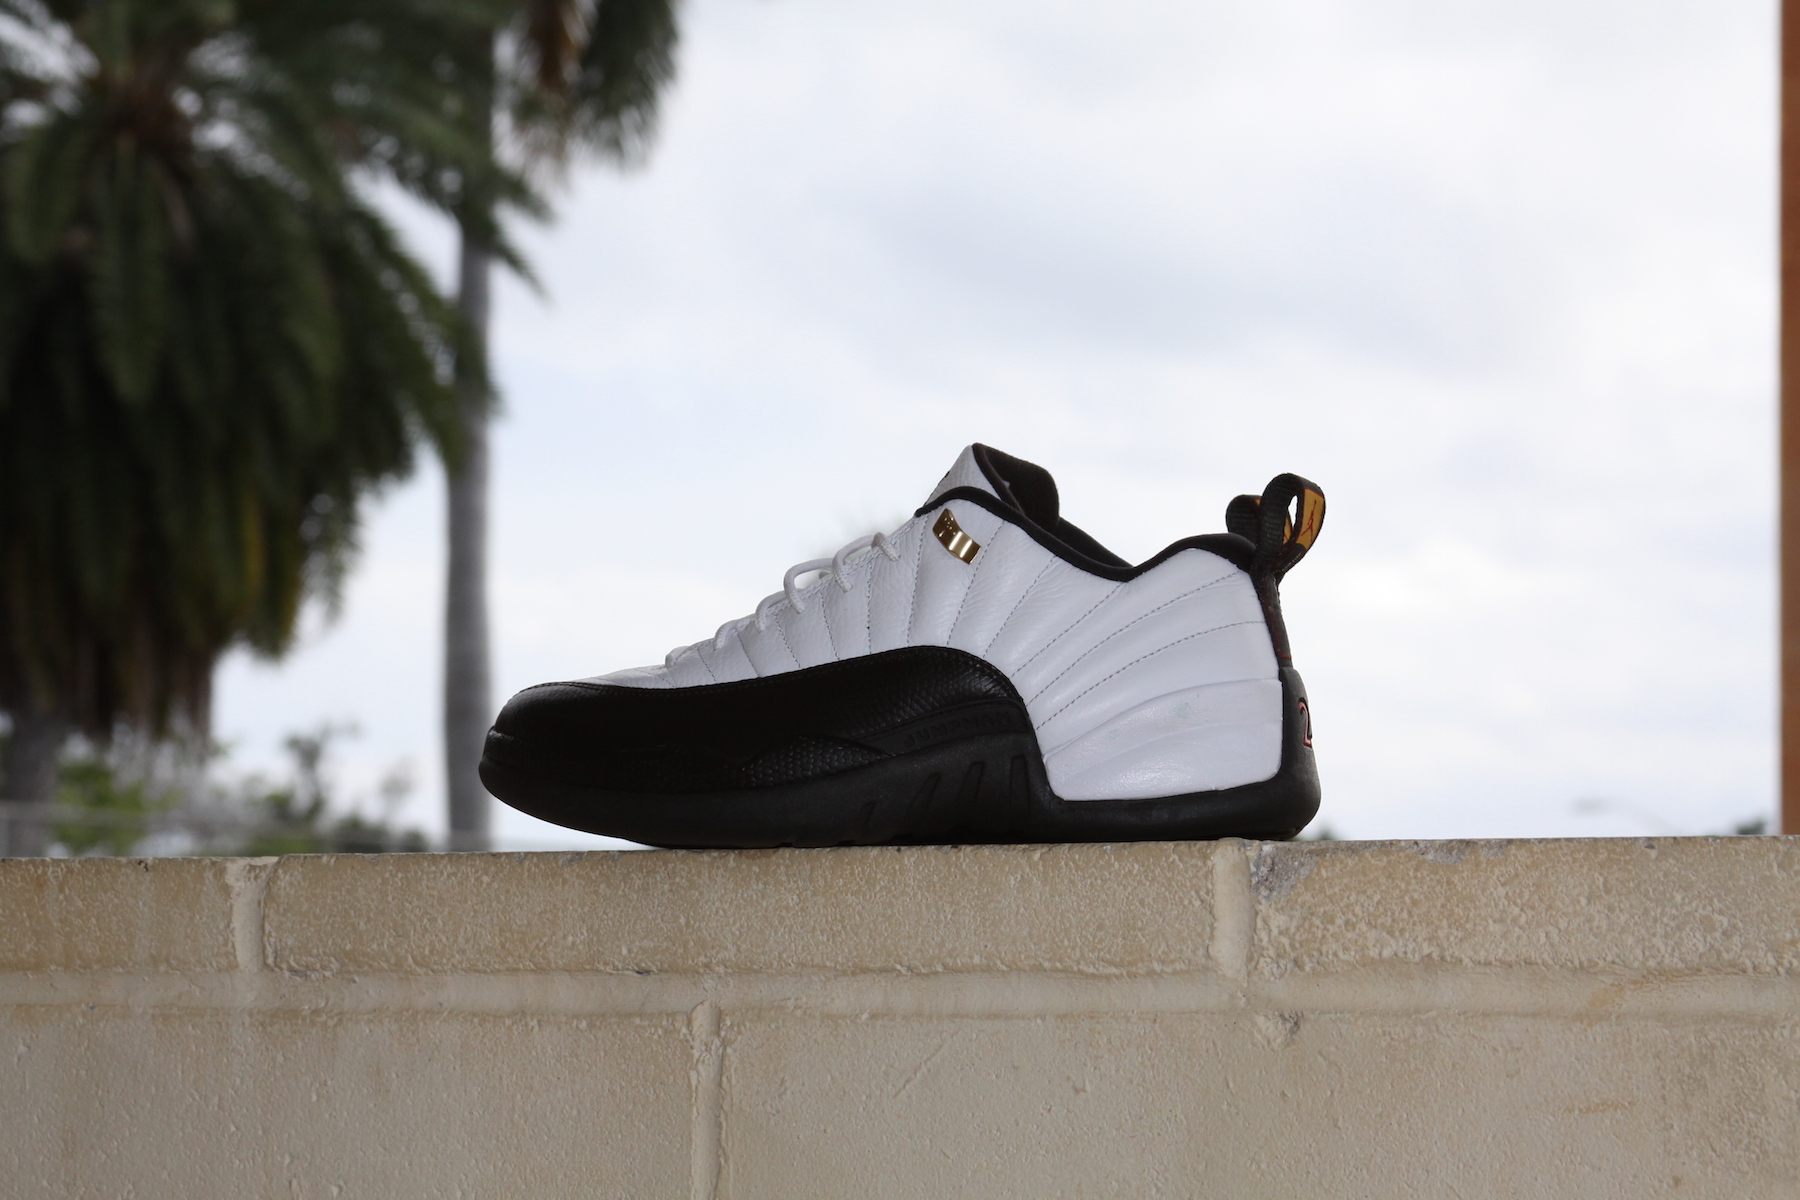 Air Jordan 12 Retro Low “Taxi” – must be the shoes